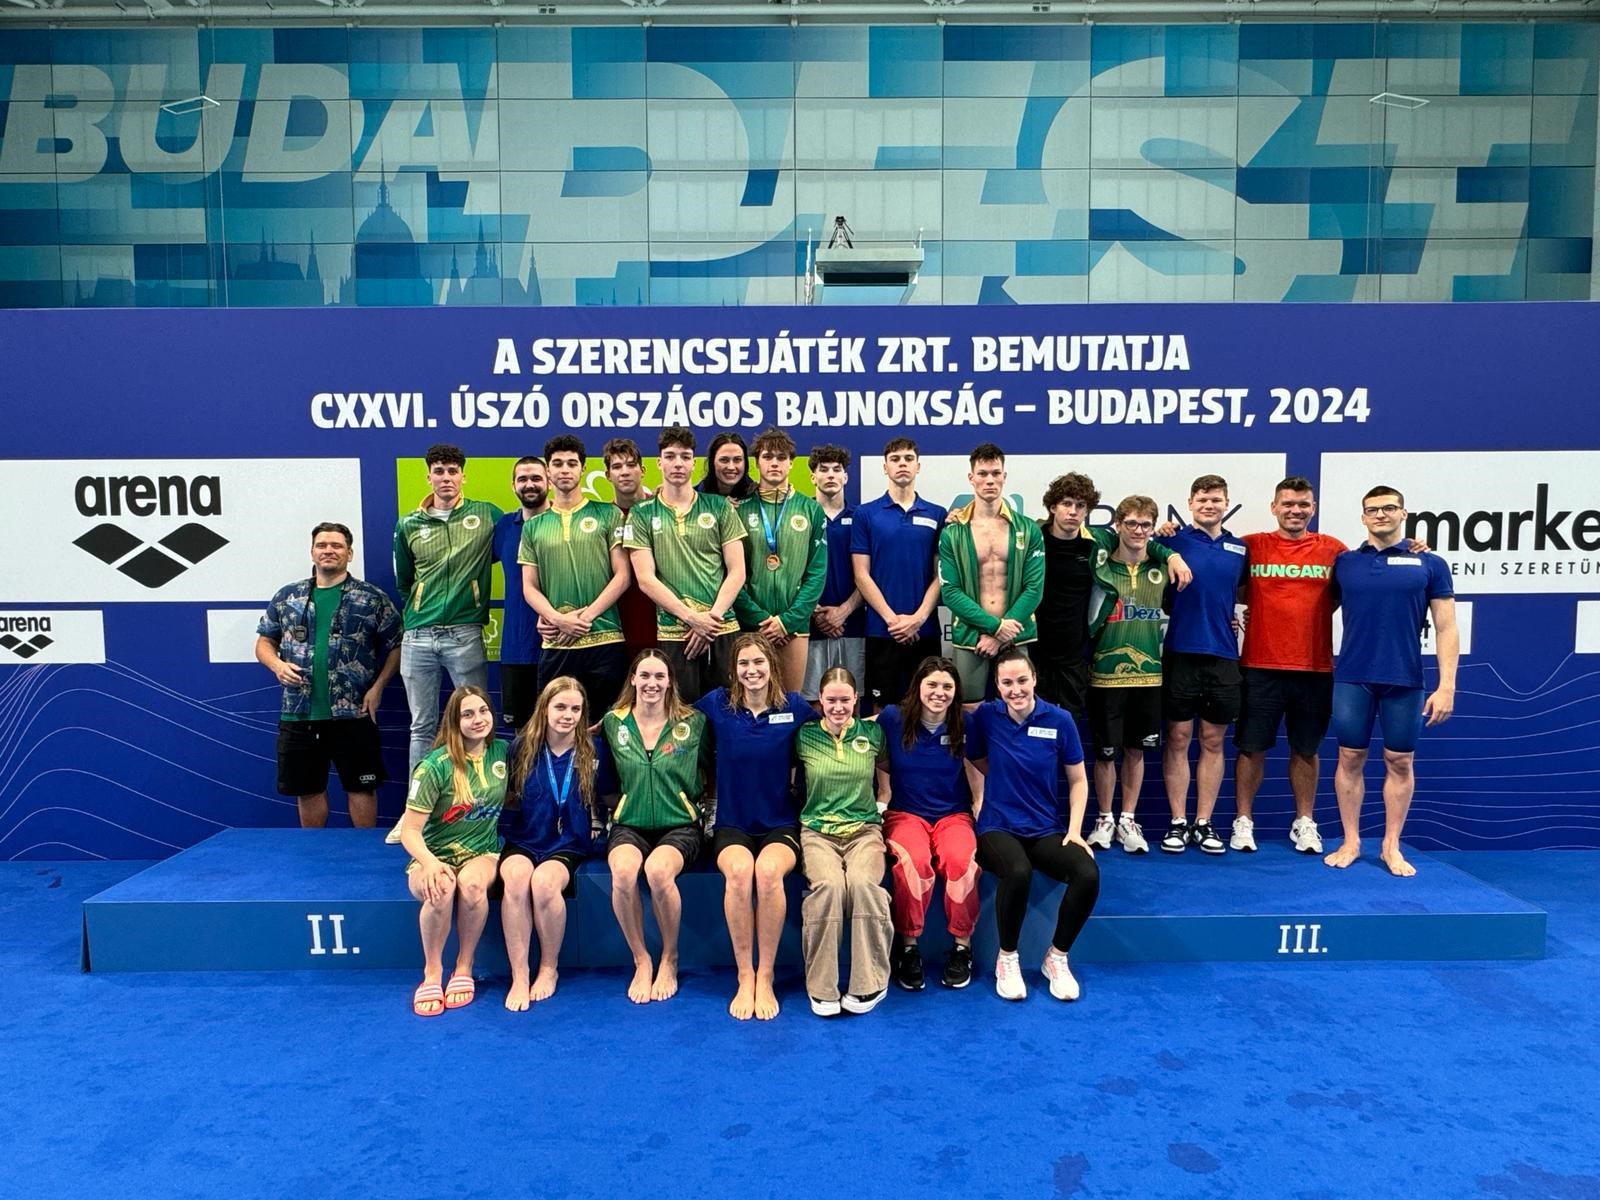 UNI-Győr Swimming SE finished at the top of the National swimming championships